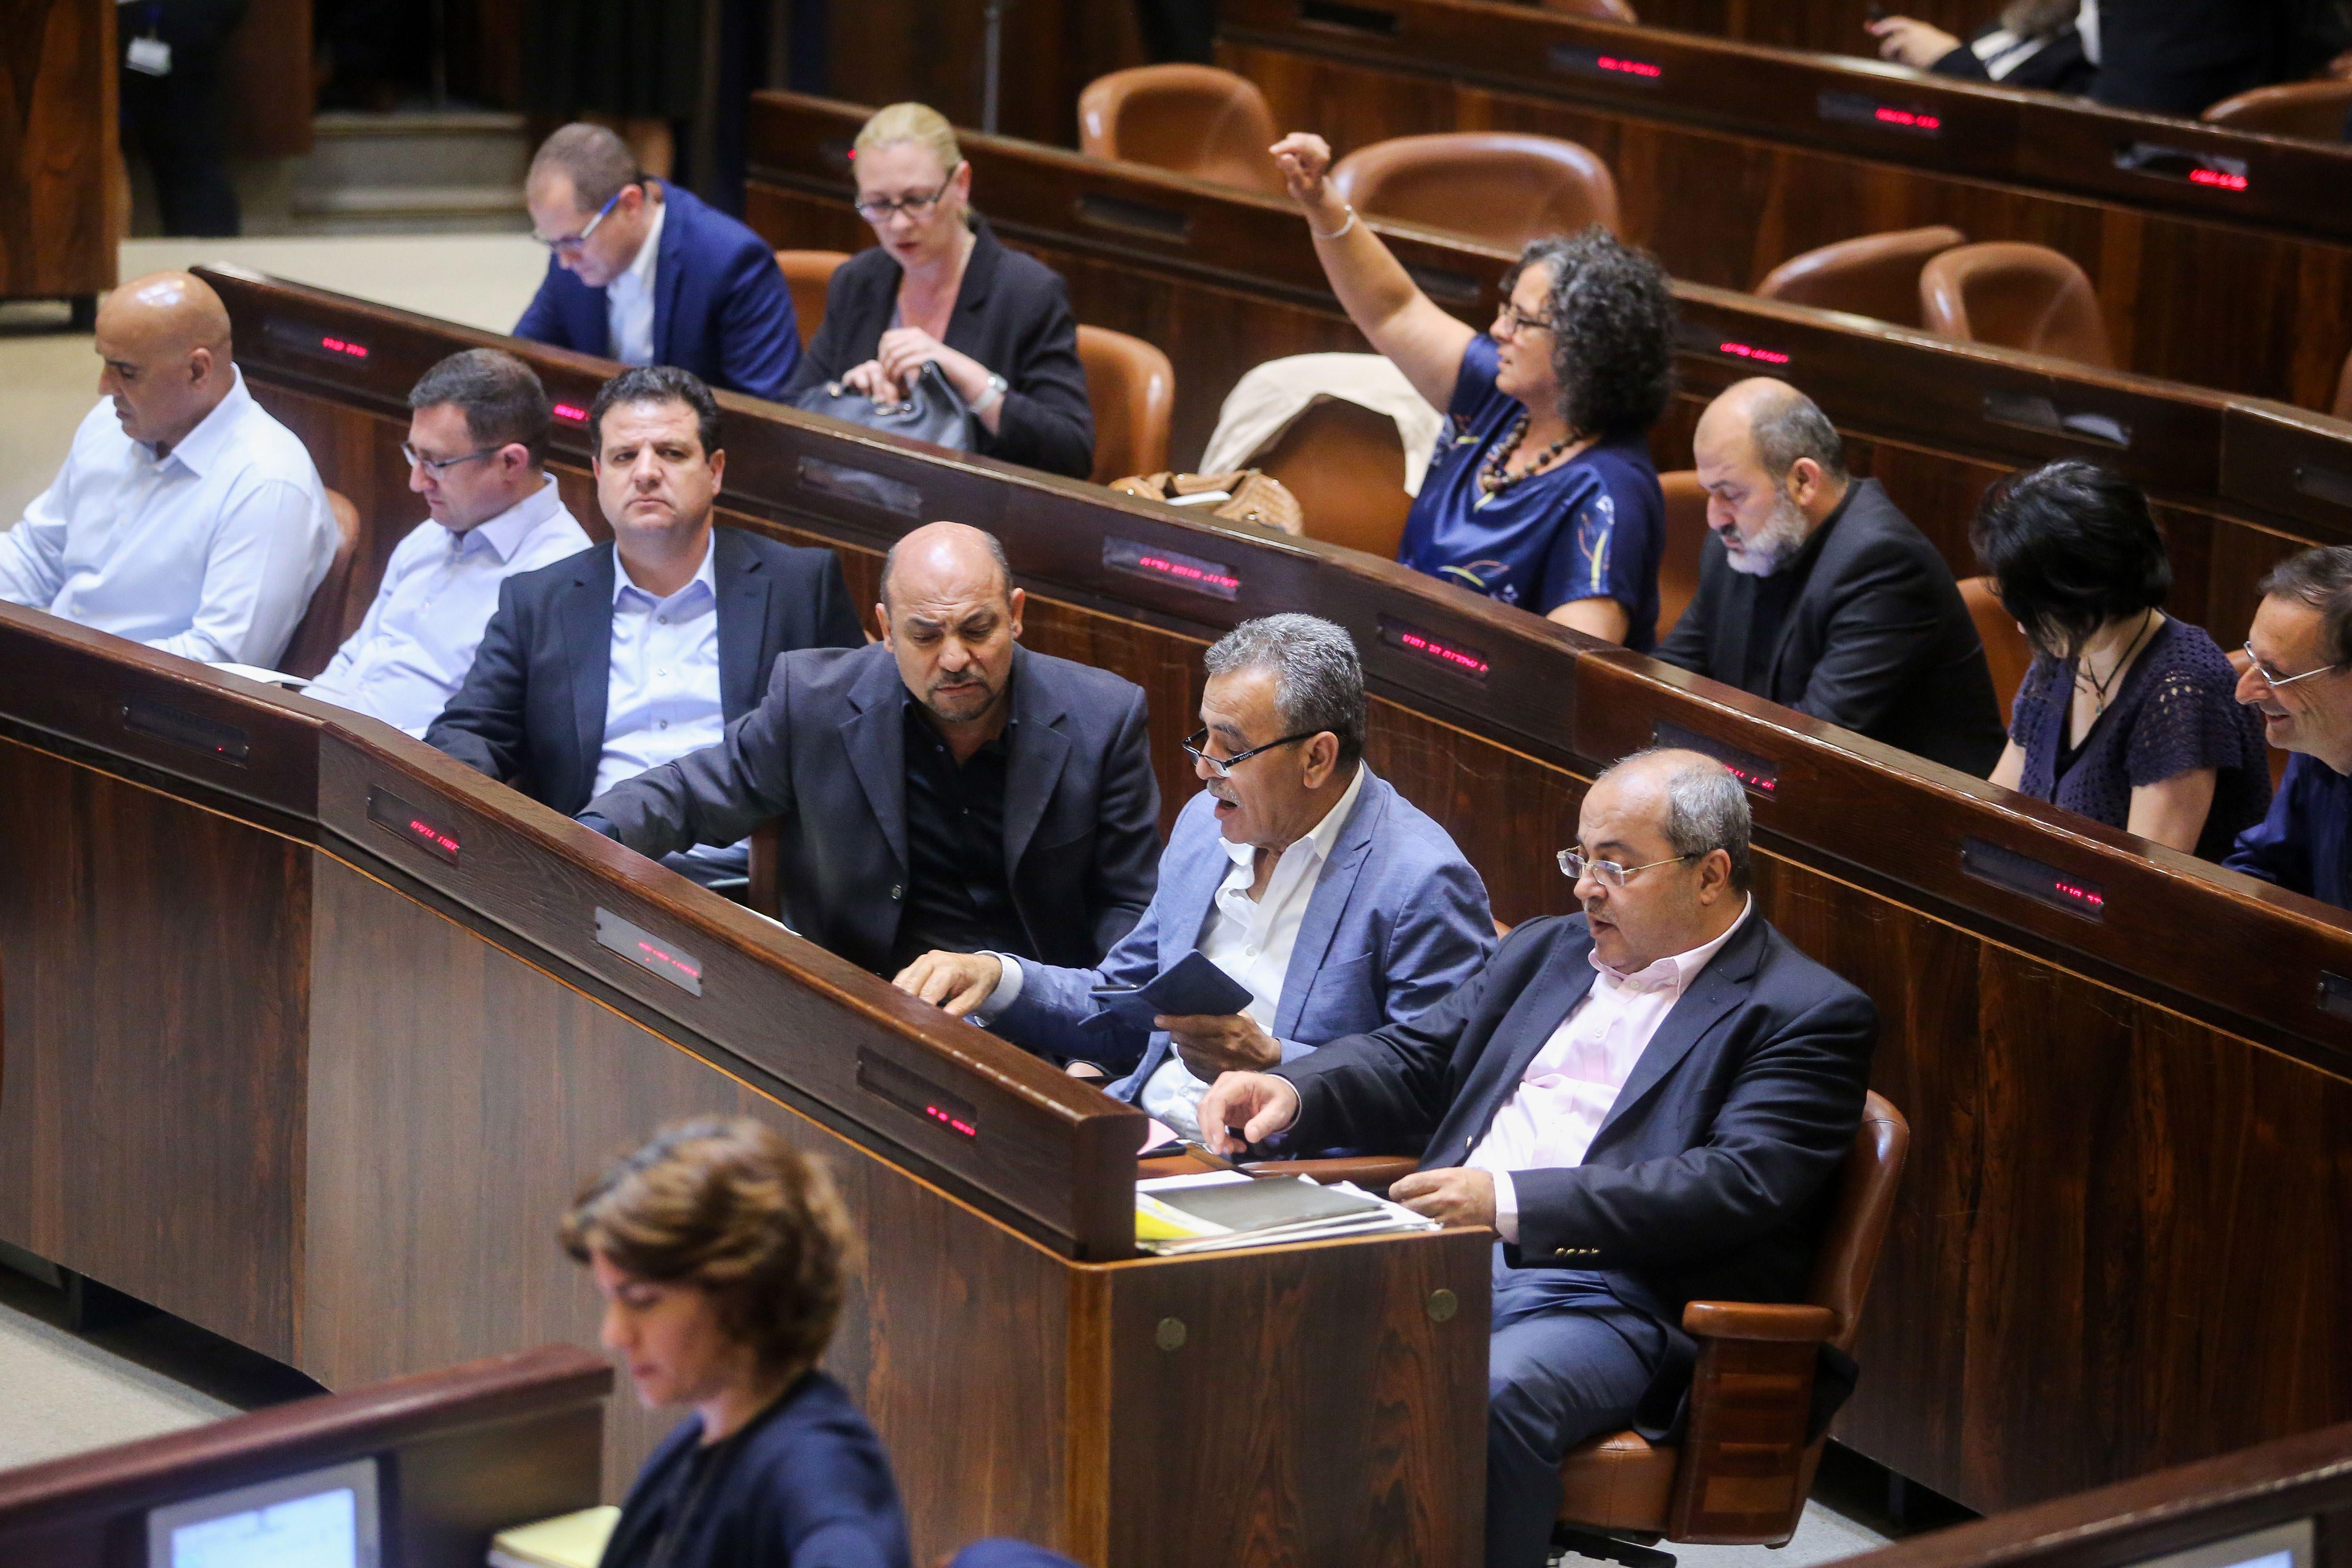 Members of the Israeli parliament sit in the Knesset.